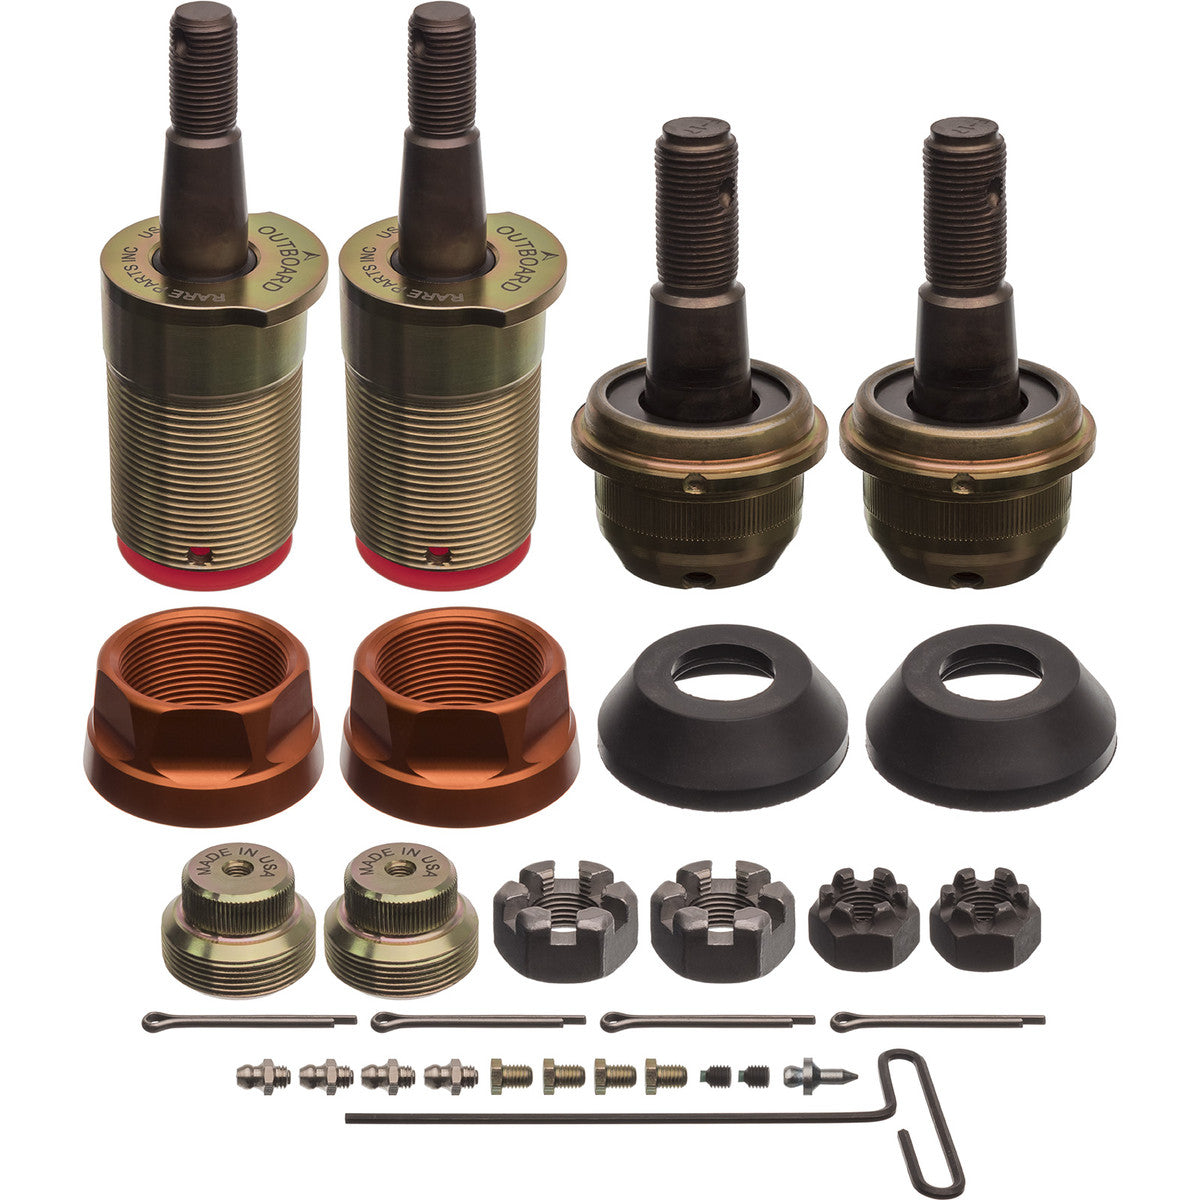 DUAL LOAD CARRYING BALL JOINT KIT (TJ)